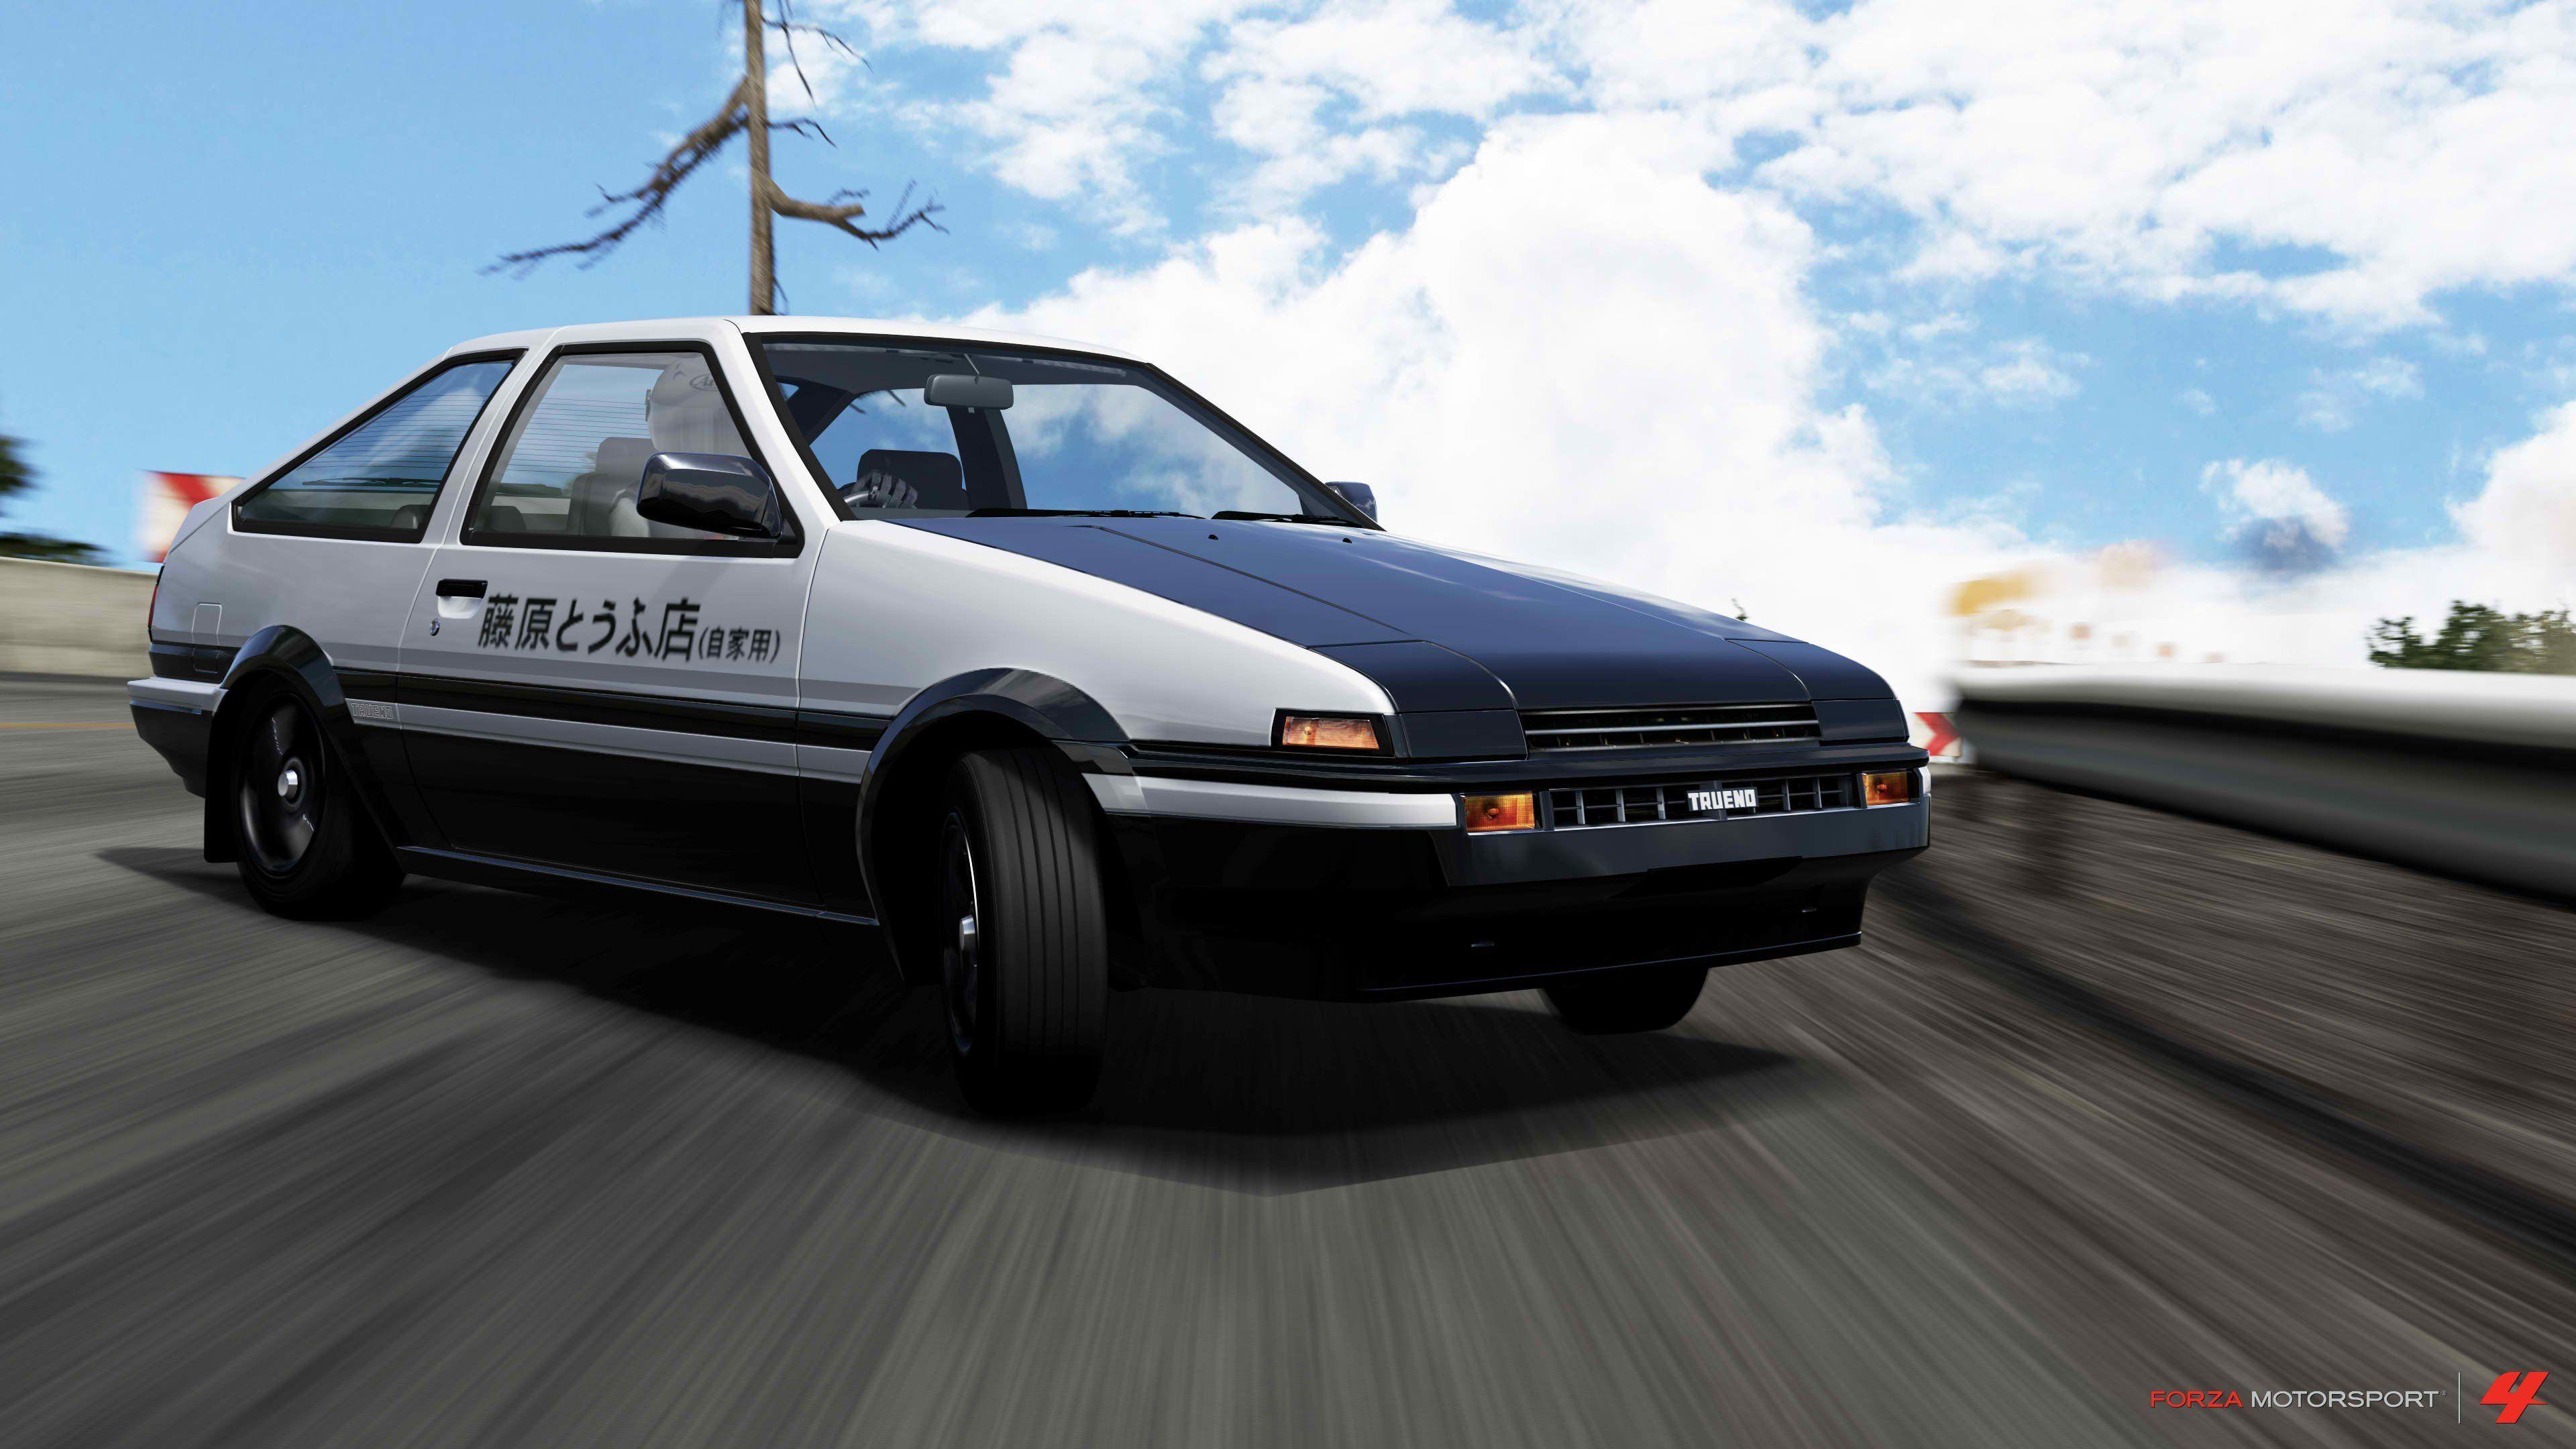 Toyota AE86 Wallpapers - Wallpaper Cave